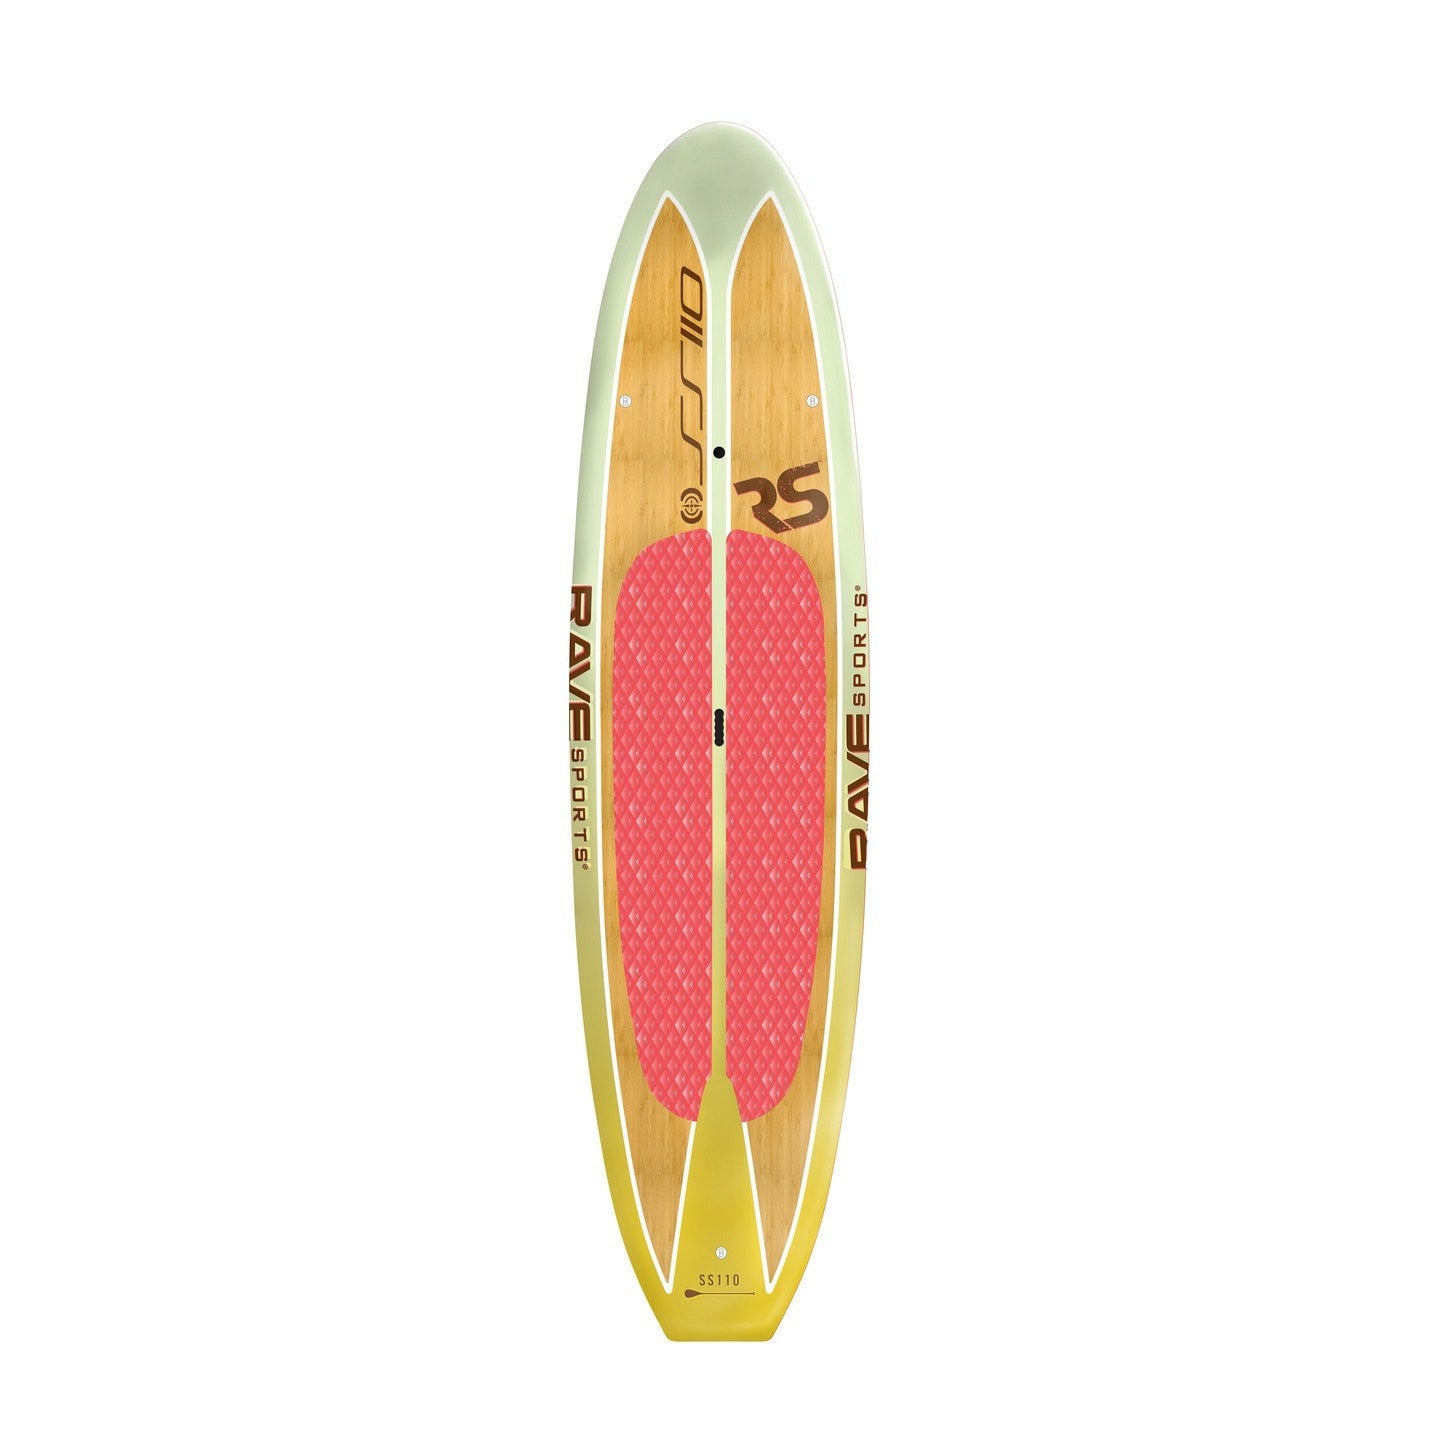 Rave Sports Shoreline Series SS110 Stand Up Paddle Board SUP - 02727 - Kayak Creek